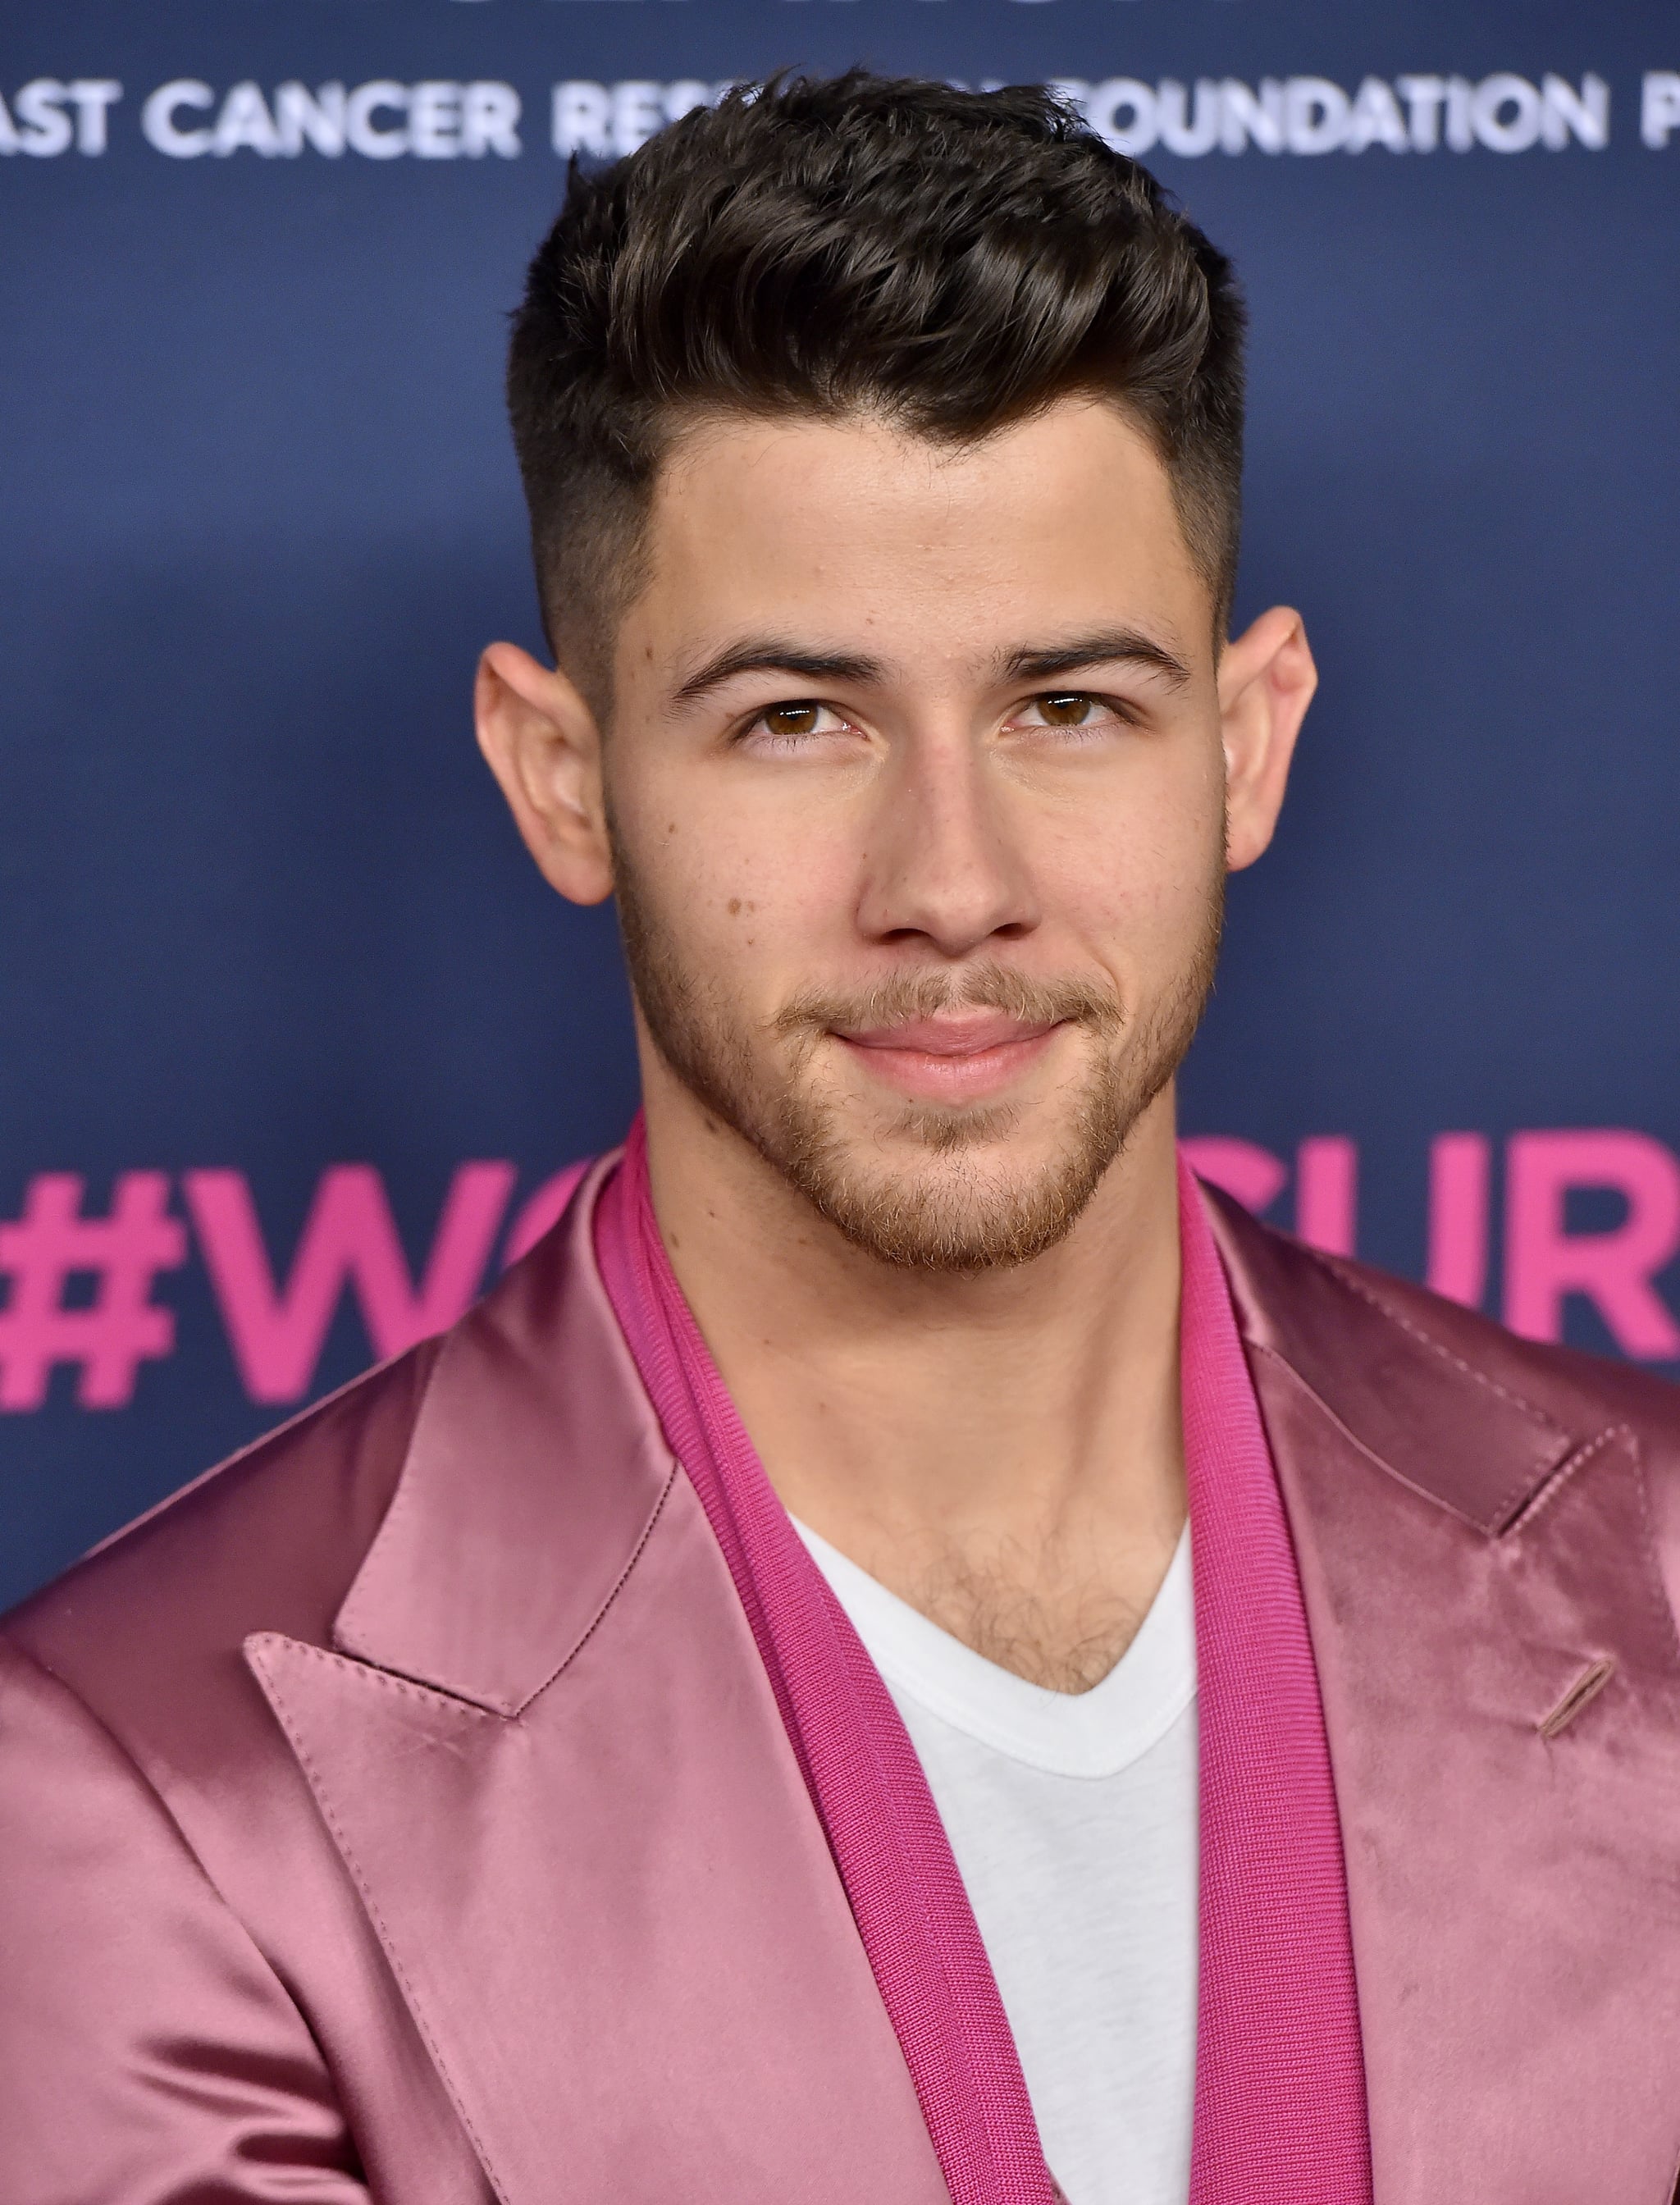 BEVERLY HILLS, CALIFORNIA - FEBRUARY 27: Nick Jonas attends The Women's Cancer Research Fund's An Unforgettable Evening 2020 at Beverly Wilshire, A Four Seasons Hotel on February 27, 2020 in Beverly Hills, California. (Photo by Axelle/Bauer-Griffin/FilmMagic)